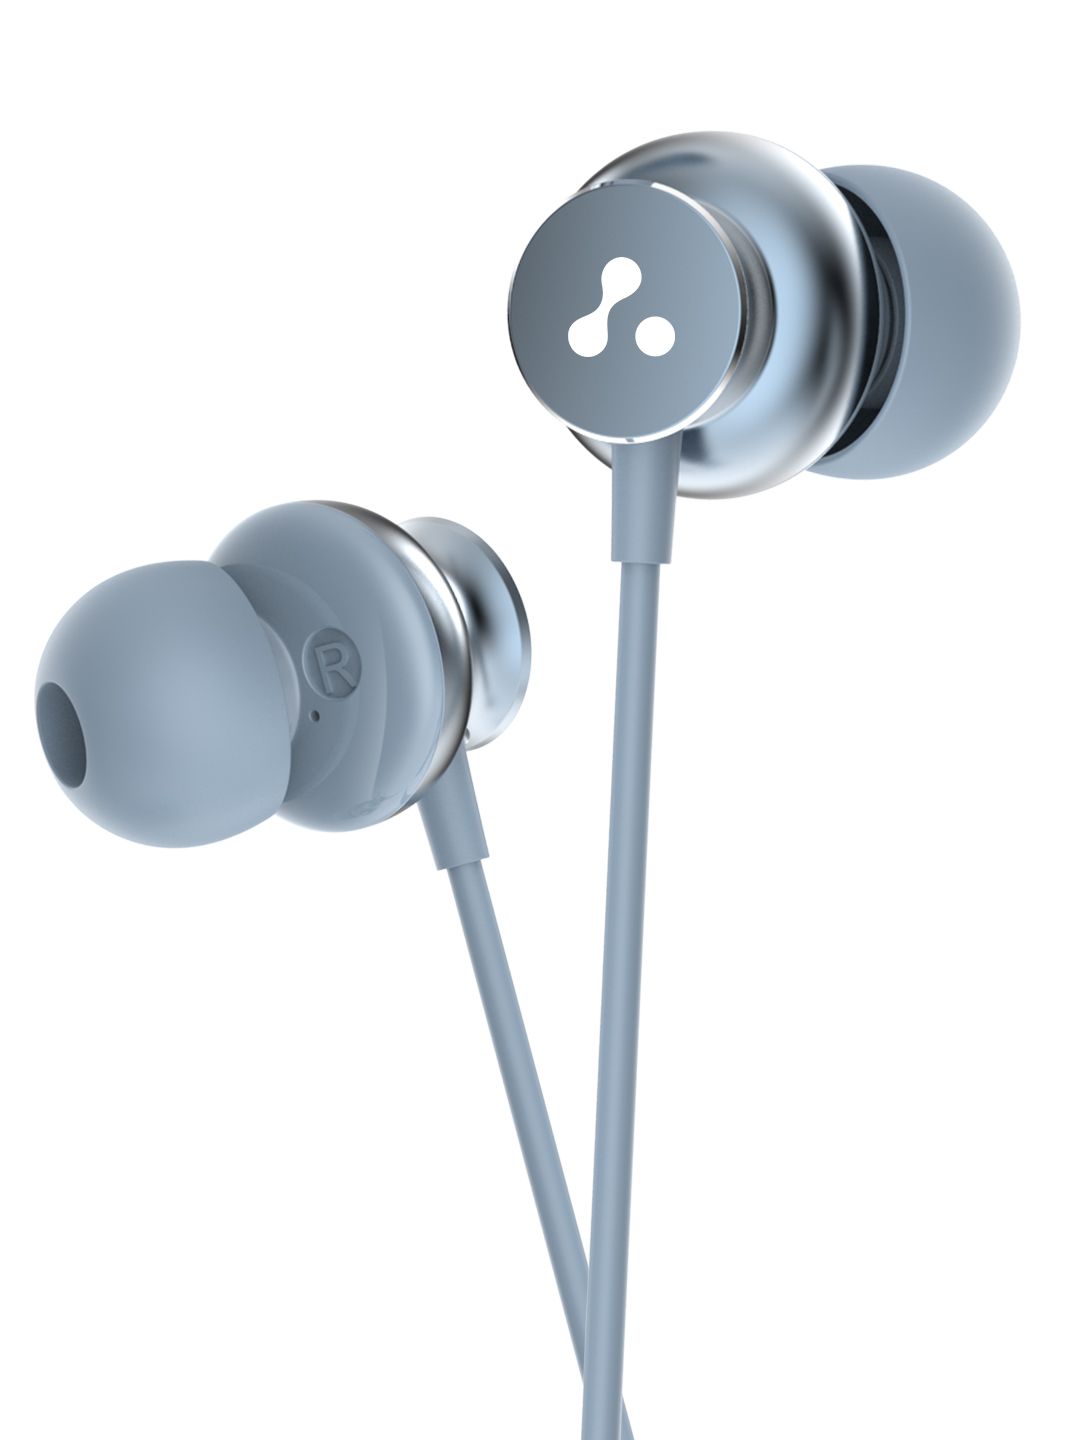 Ambrane Stringz 38 Wired Earphones with Mic & Powerful HD Sound with High Bass - Grey Price in India